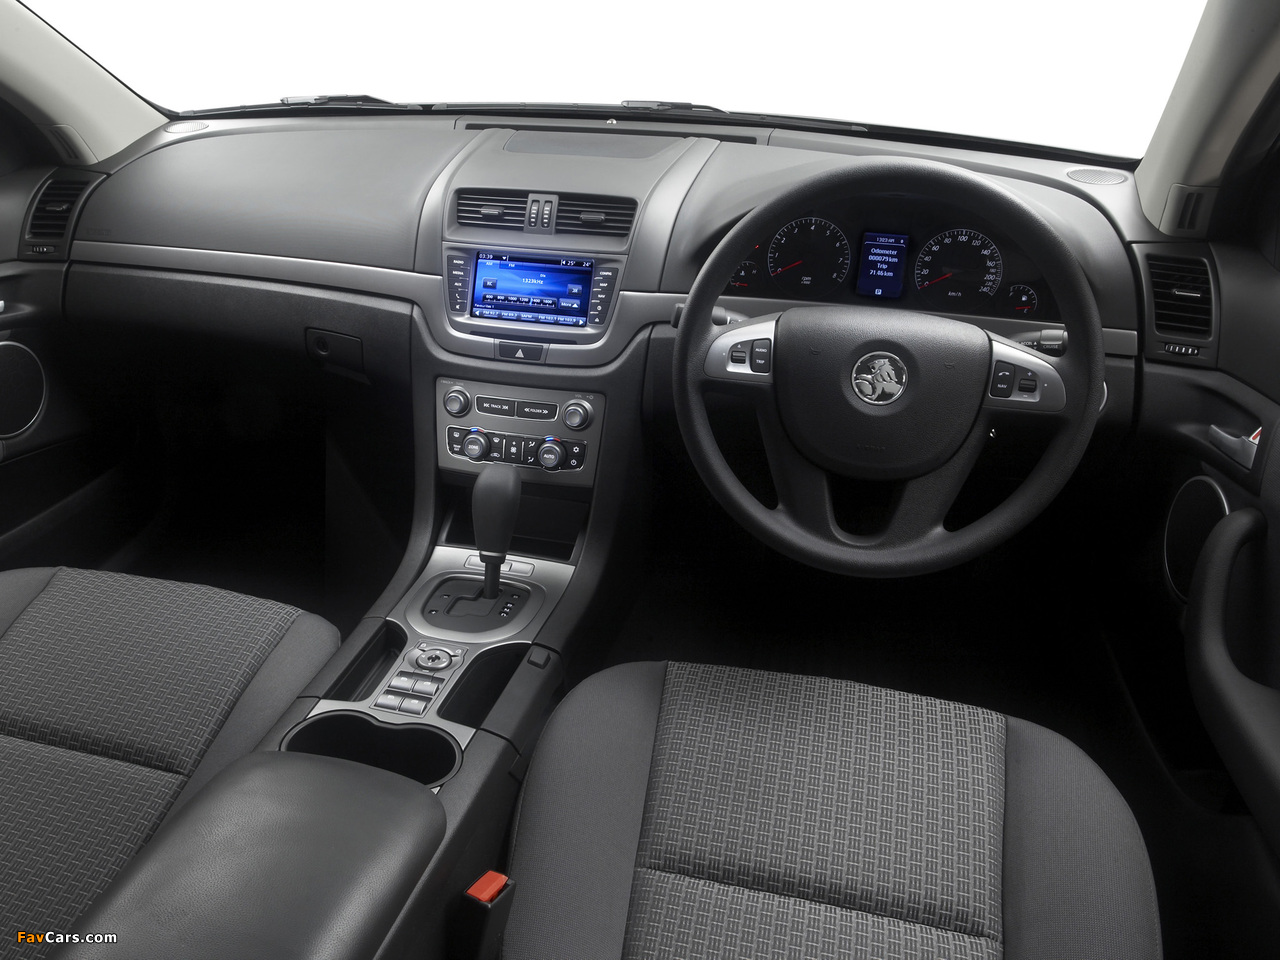 Holden Commodore Omega (VE Series II) 2010–13 pictures (1280 x 960)